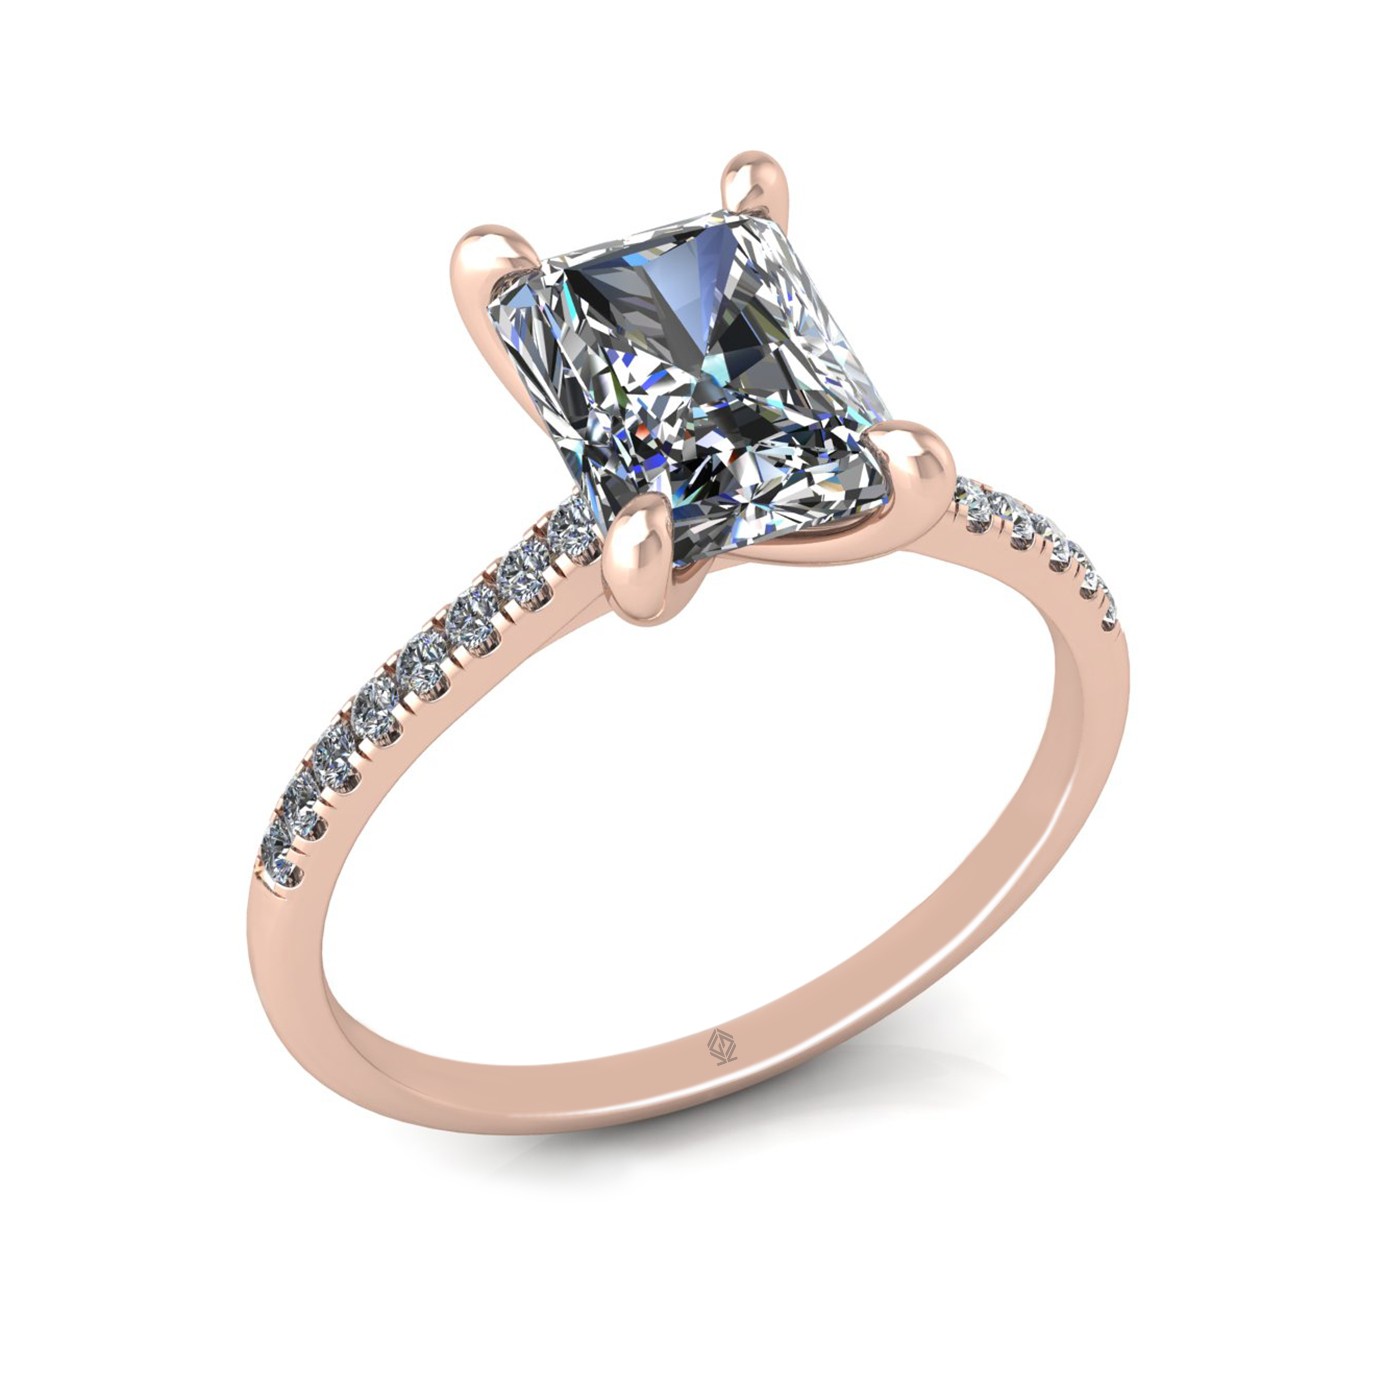 18k rose gold  2,00 ct 4 prongs radiant cut diamond engagement ring with whisper thin pavÉ set band